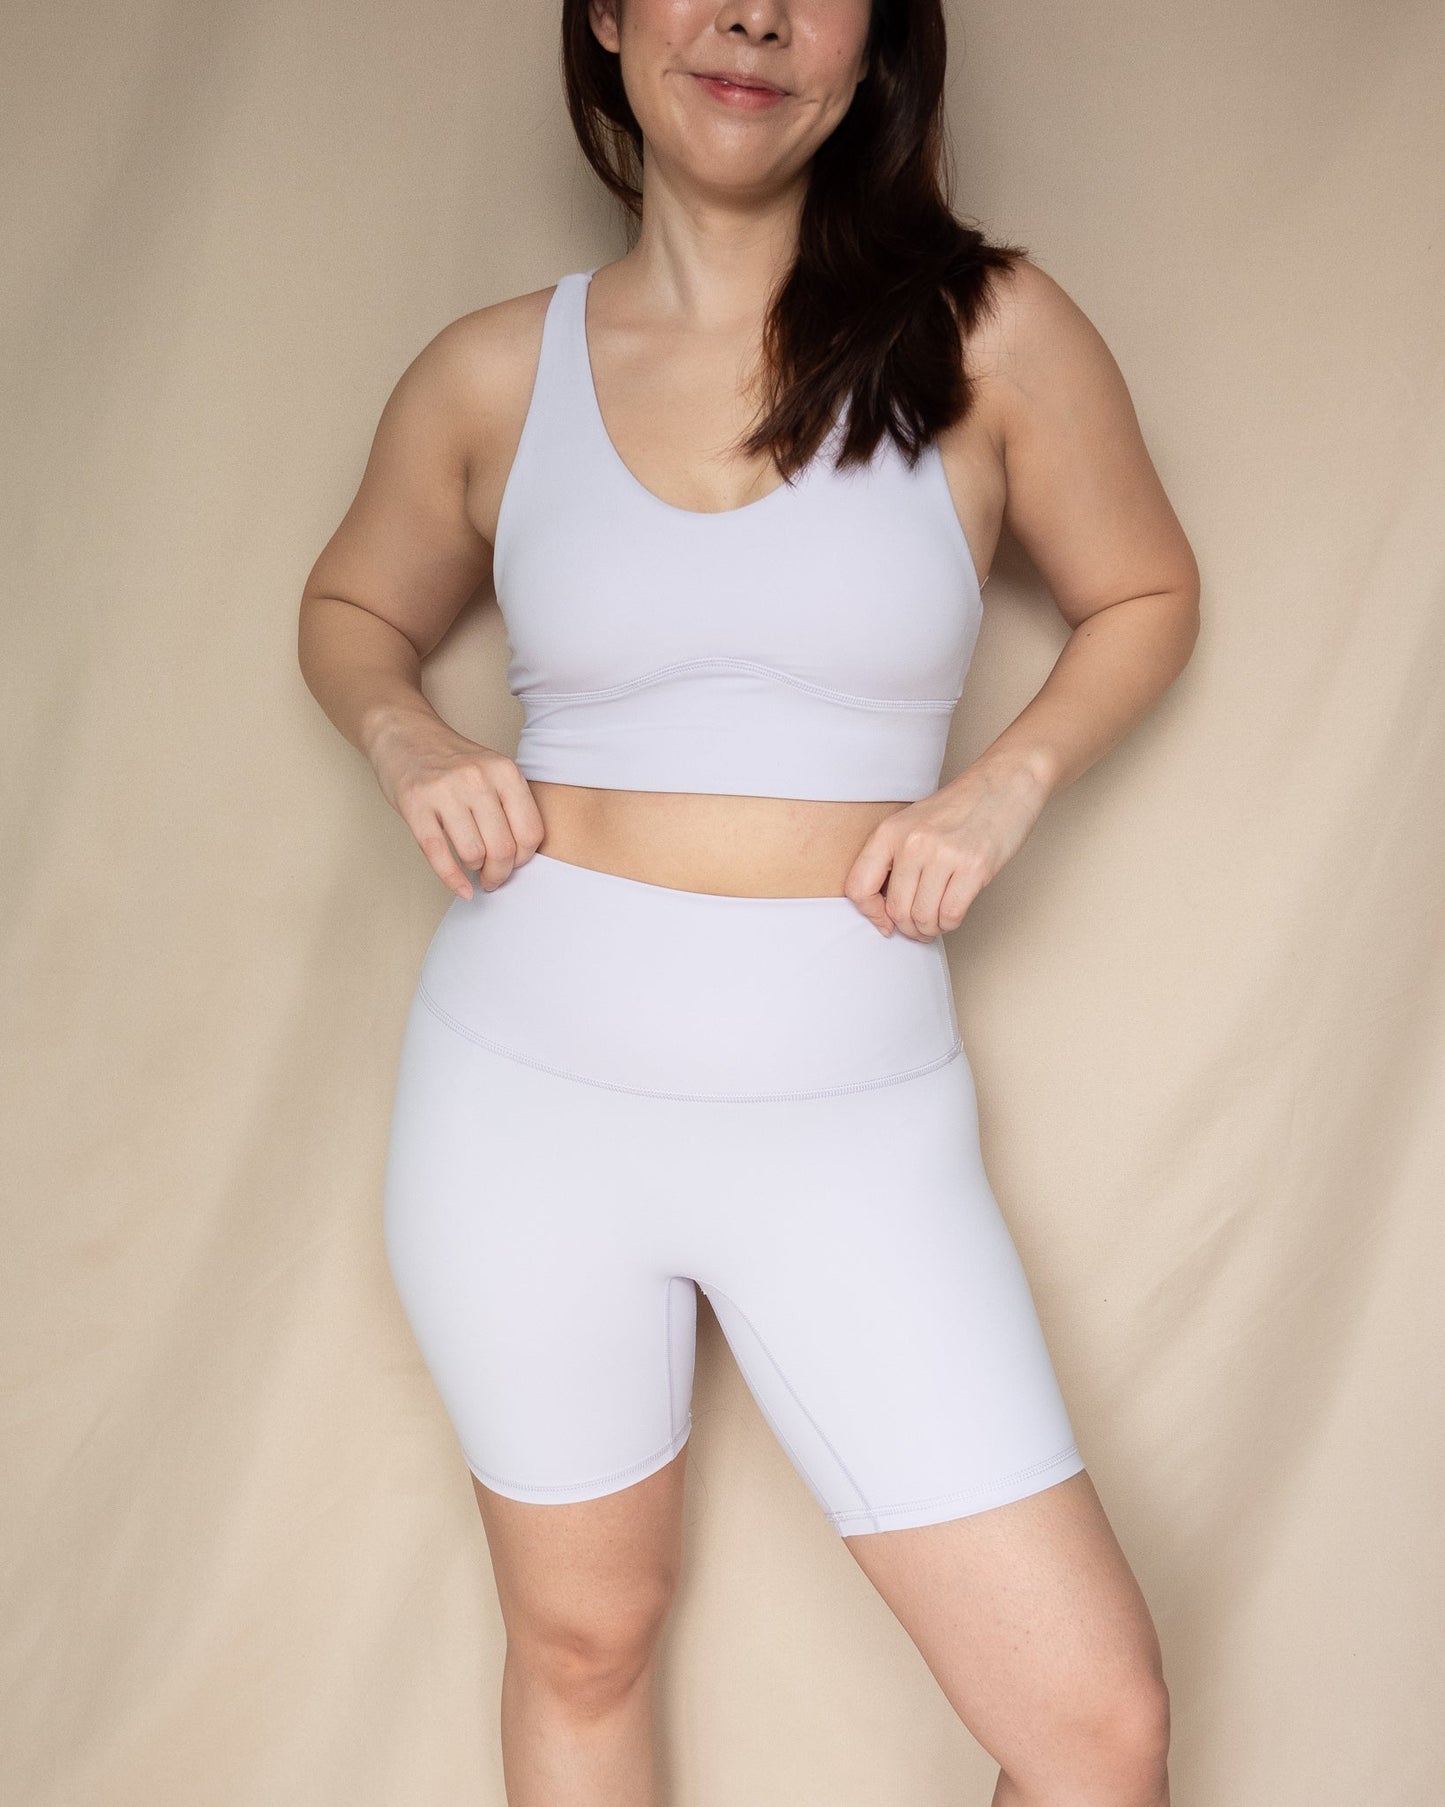 Train shorts 2.0 in Lilac Mist - New Day Activewear